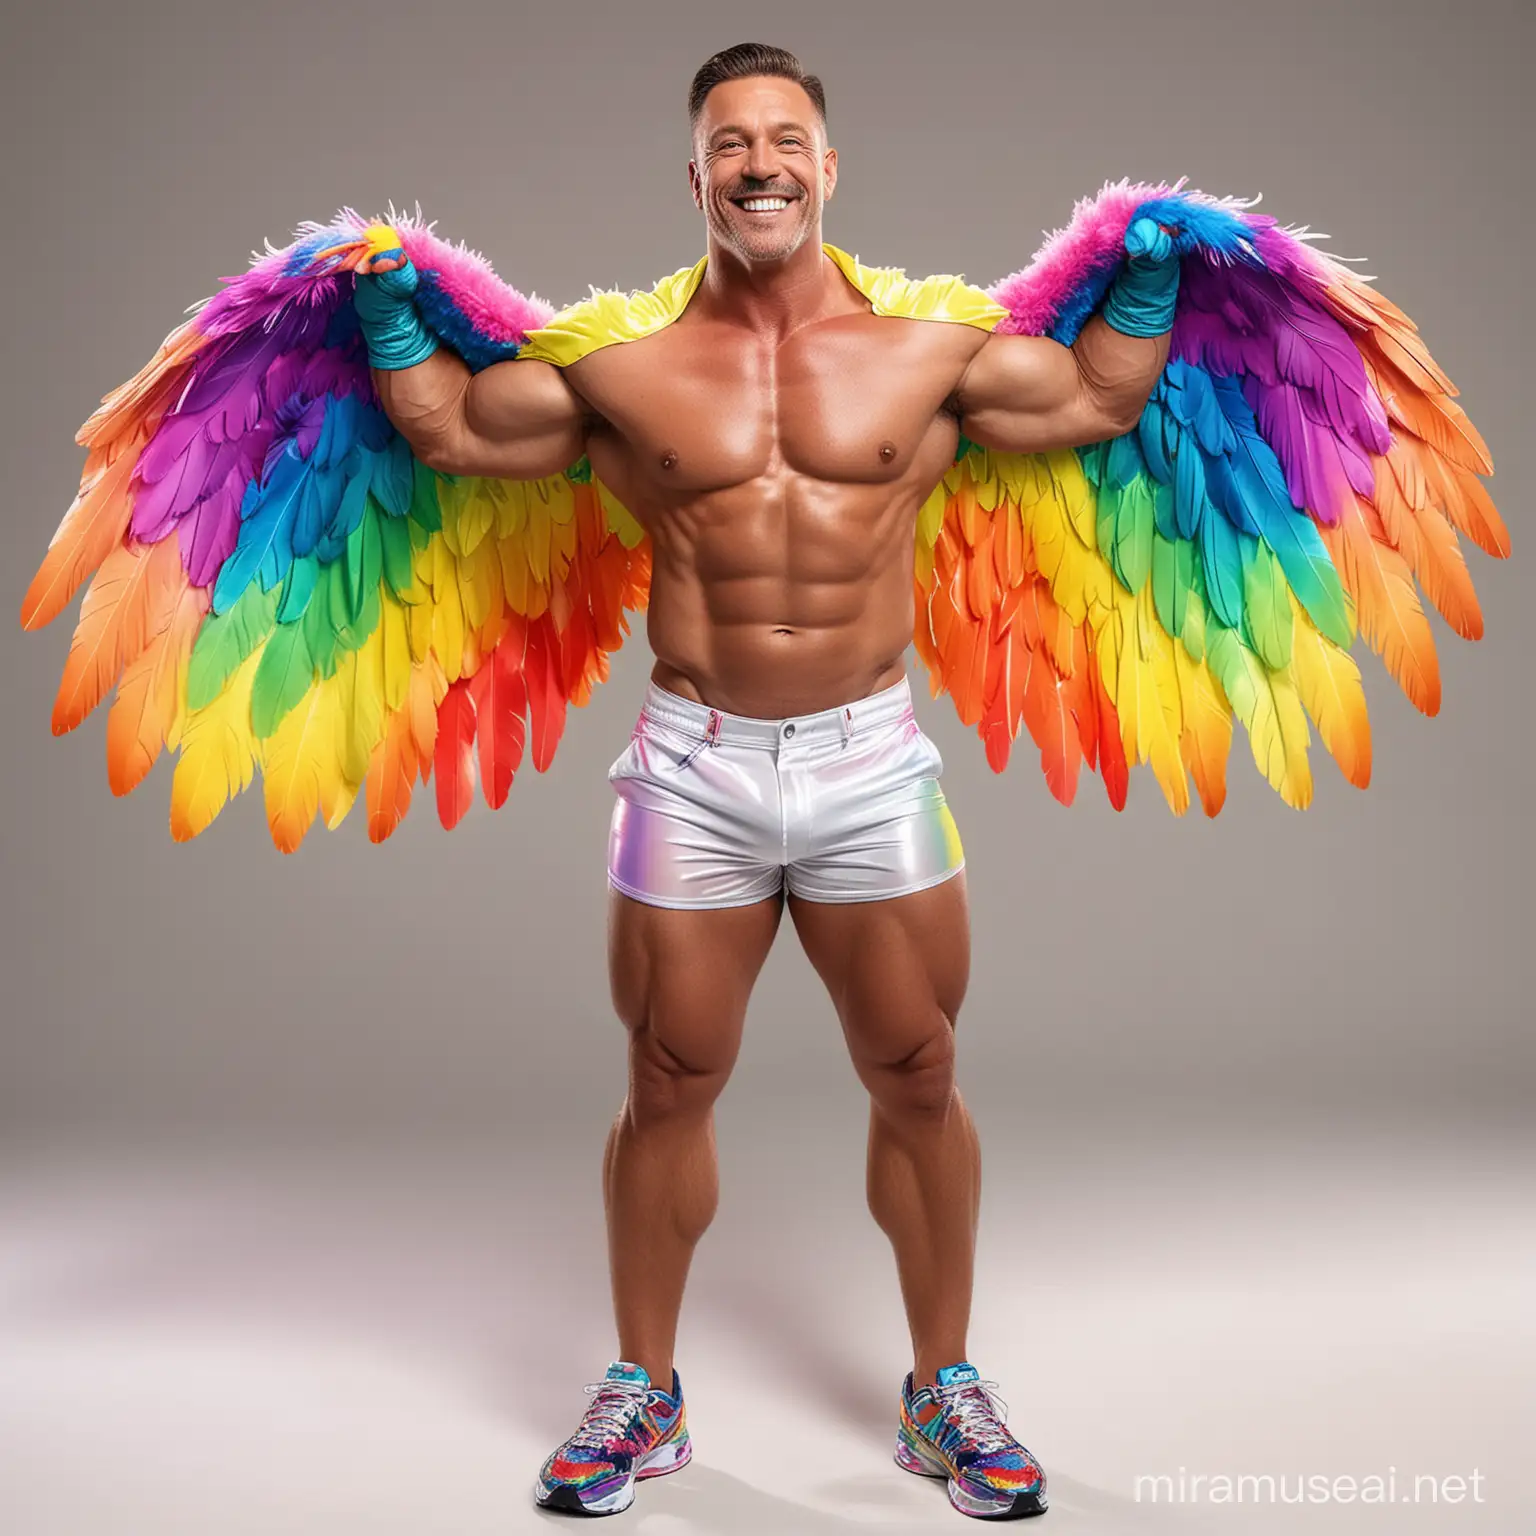 Joyful Topless Chunky Bodybuilder Daddy with Rainbow Jacket and Eagle Wings Flexing